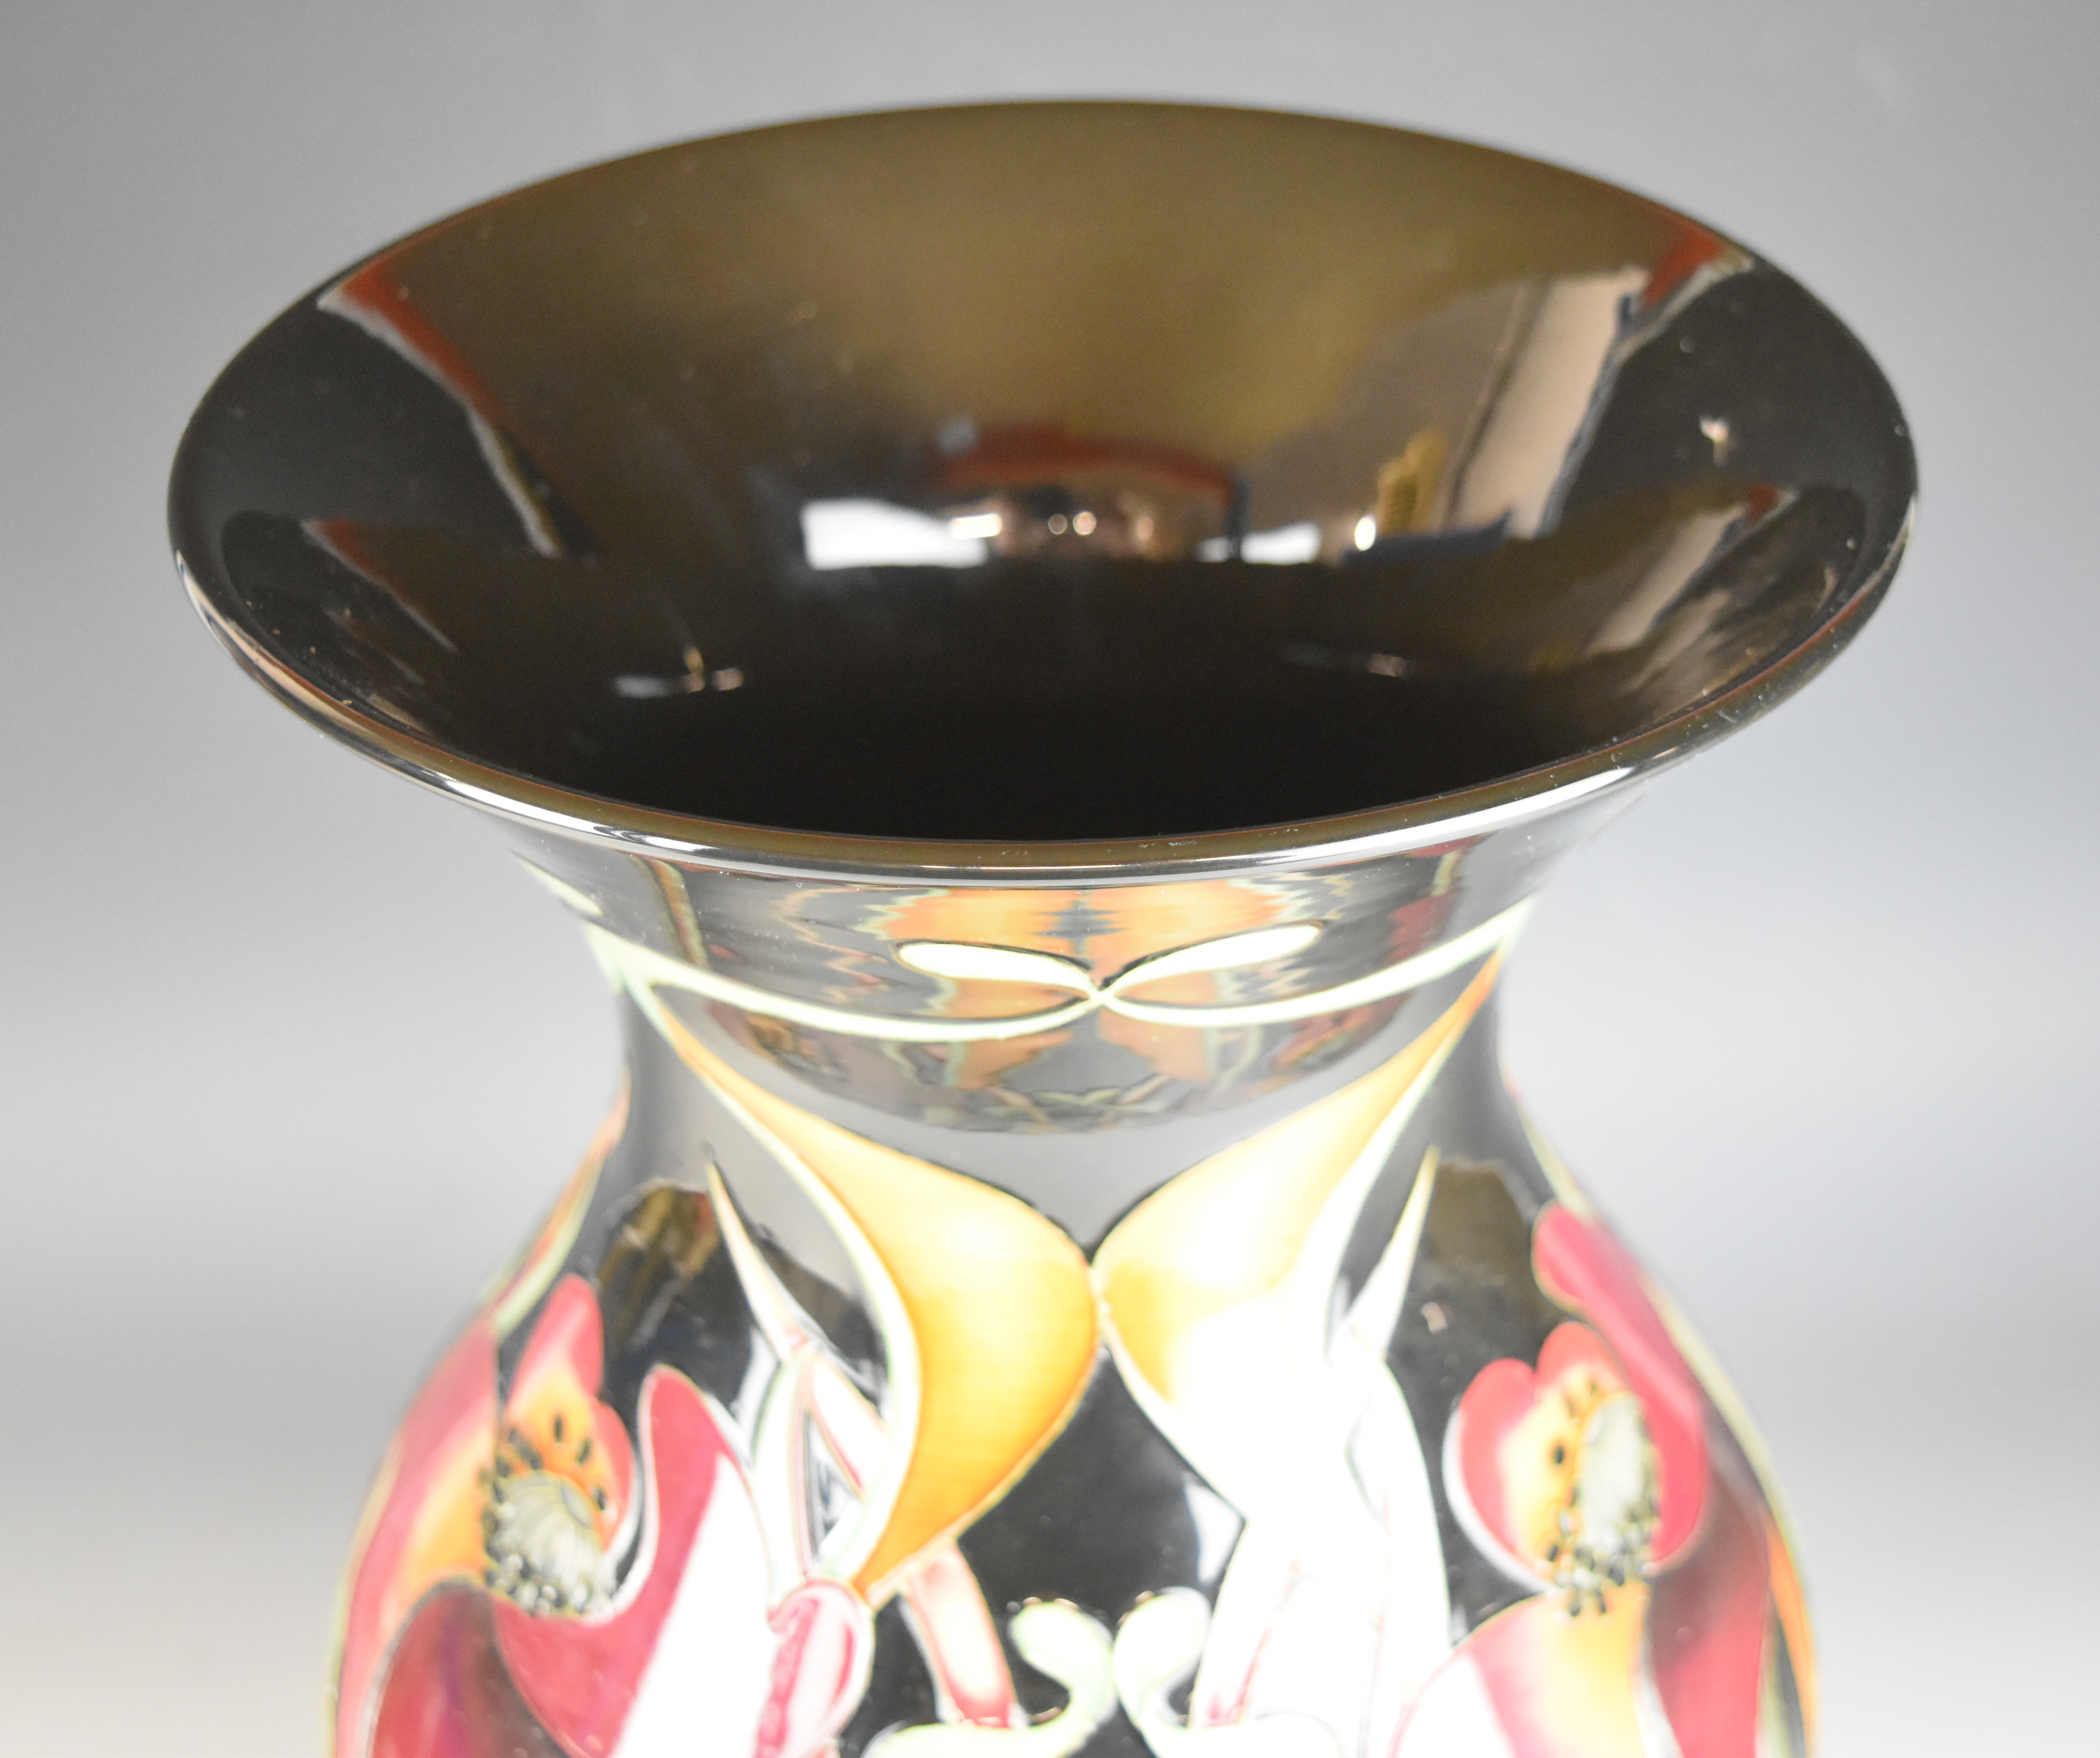 Moorcroft prestige vase 'In Praise of Poppies' with 'Trial 22-7-11' to base and label stating - Image 9 of 12